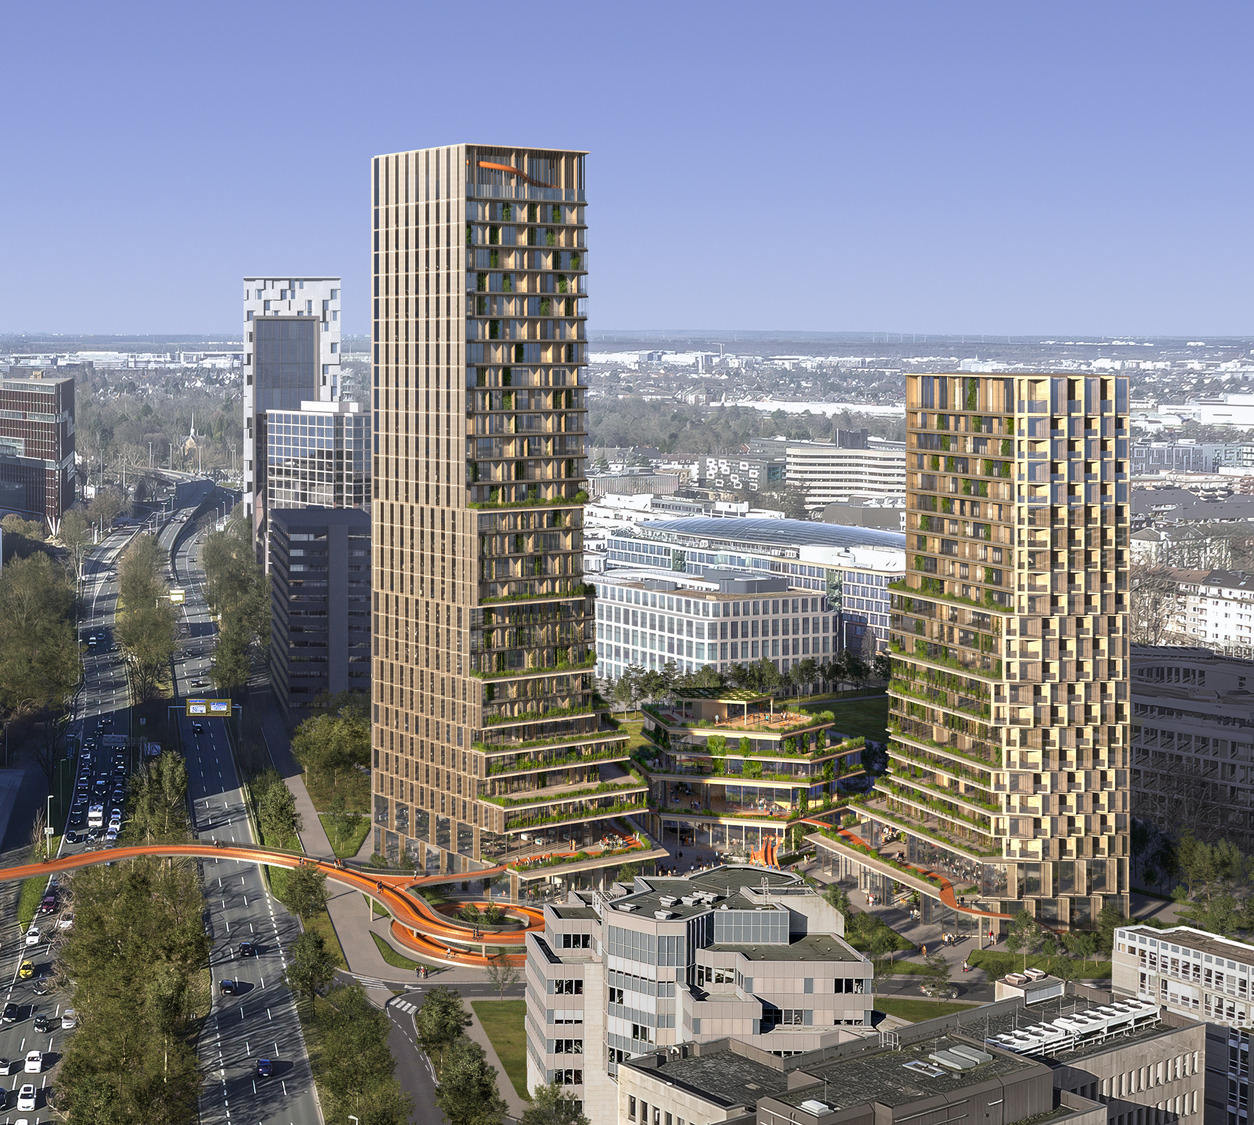 PRESS RELEASE | Mixing it up. New typologies for a lively, sustainable and cultural future - UNStudio’s proposal wins the competition for a new mixed-use development in Düsseldorf